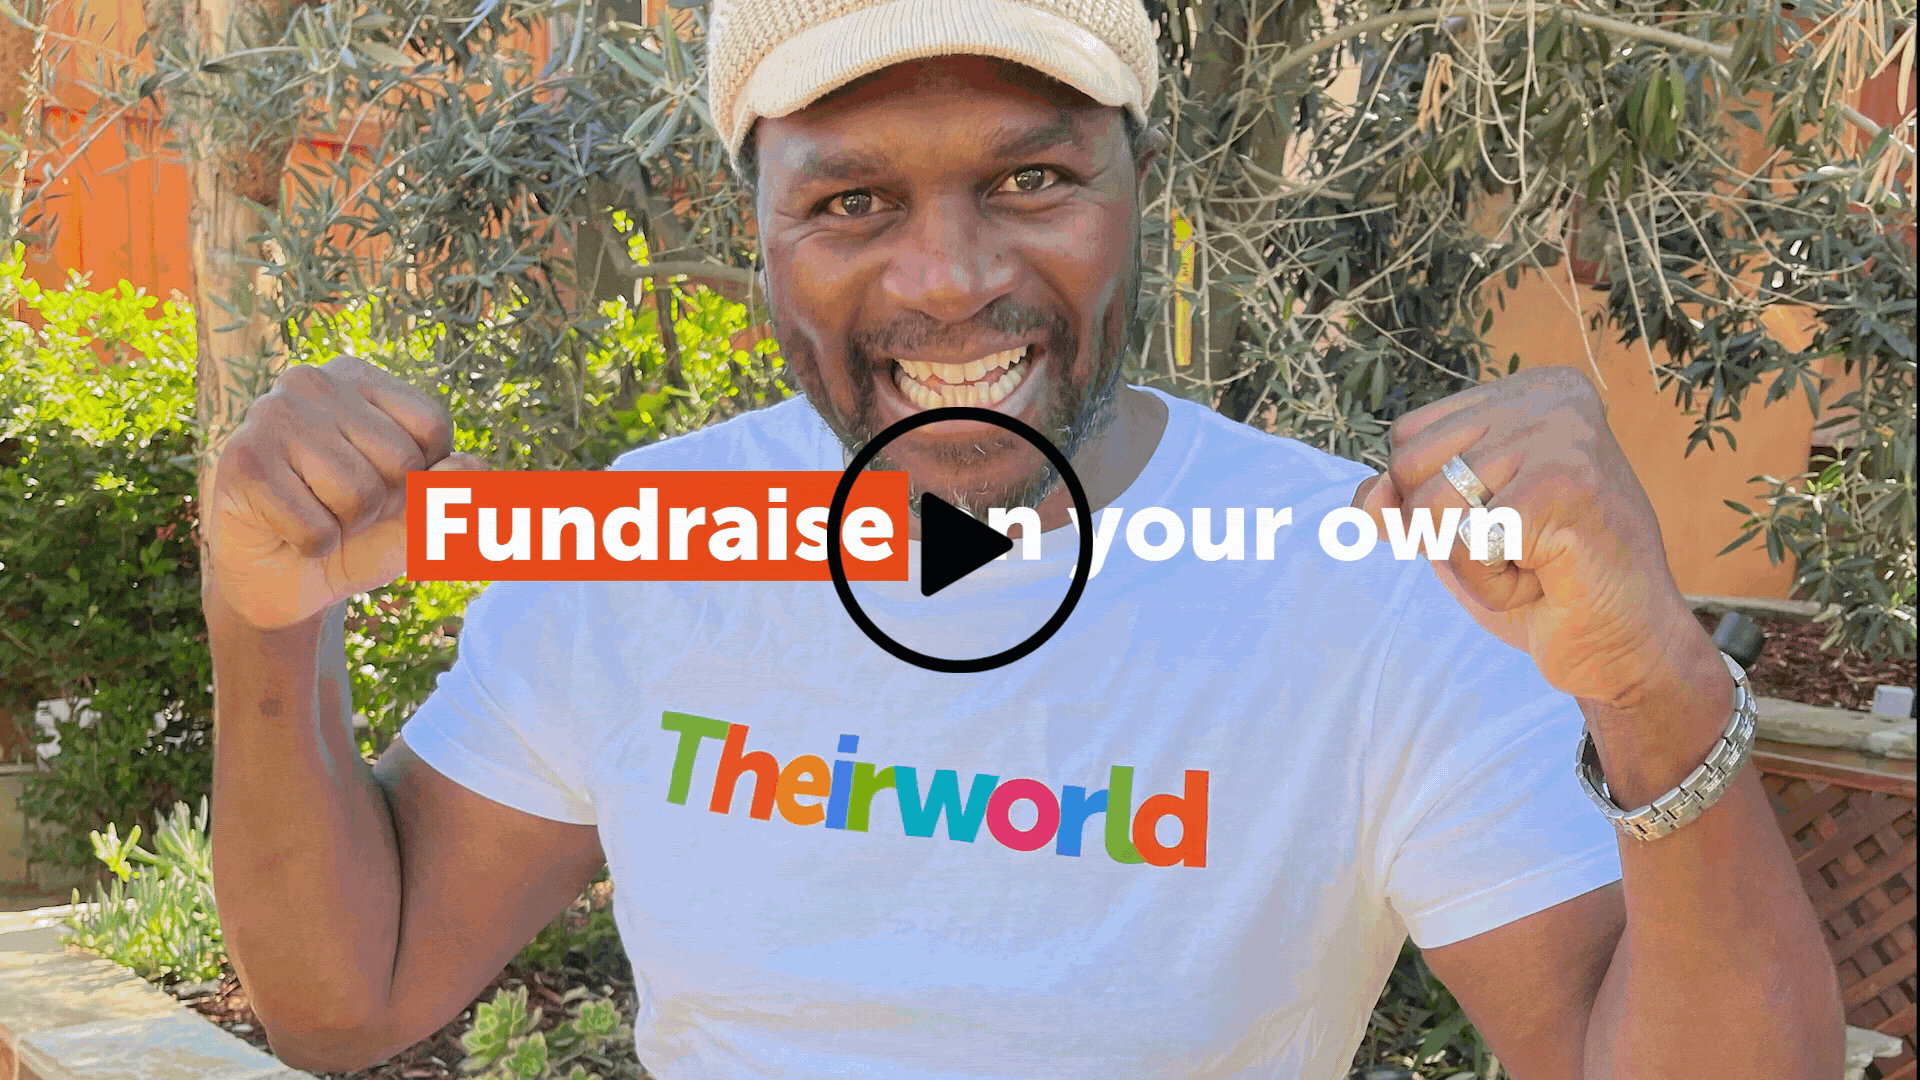 Theirworld fundraising film gif featuring photos of people who have fundraised for Theirworld